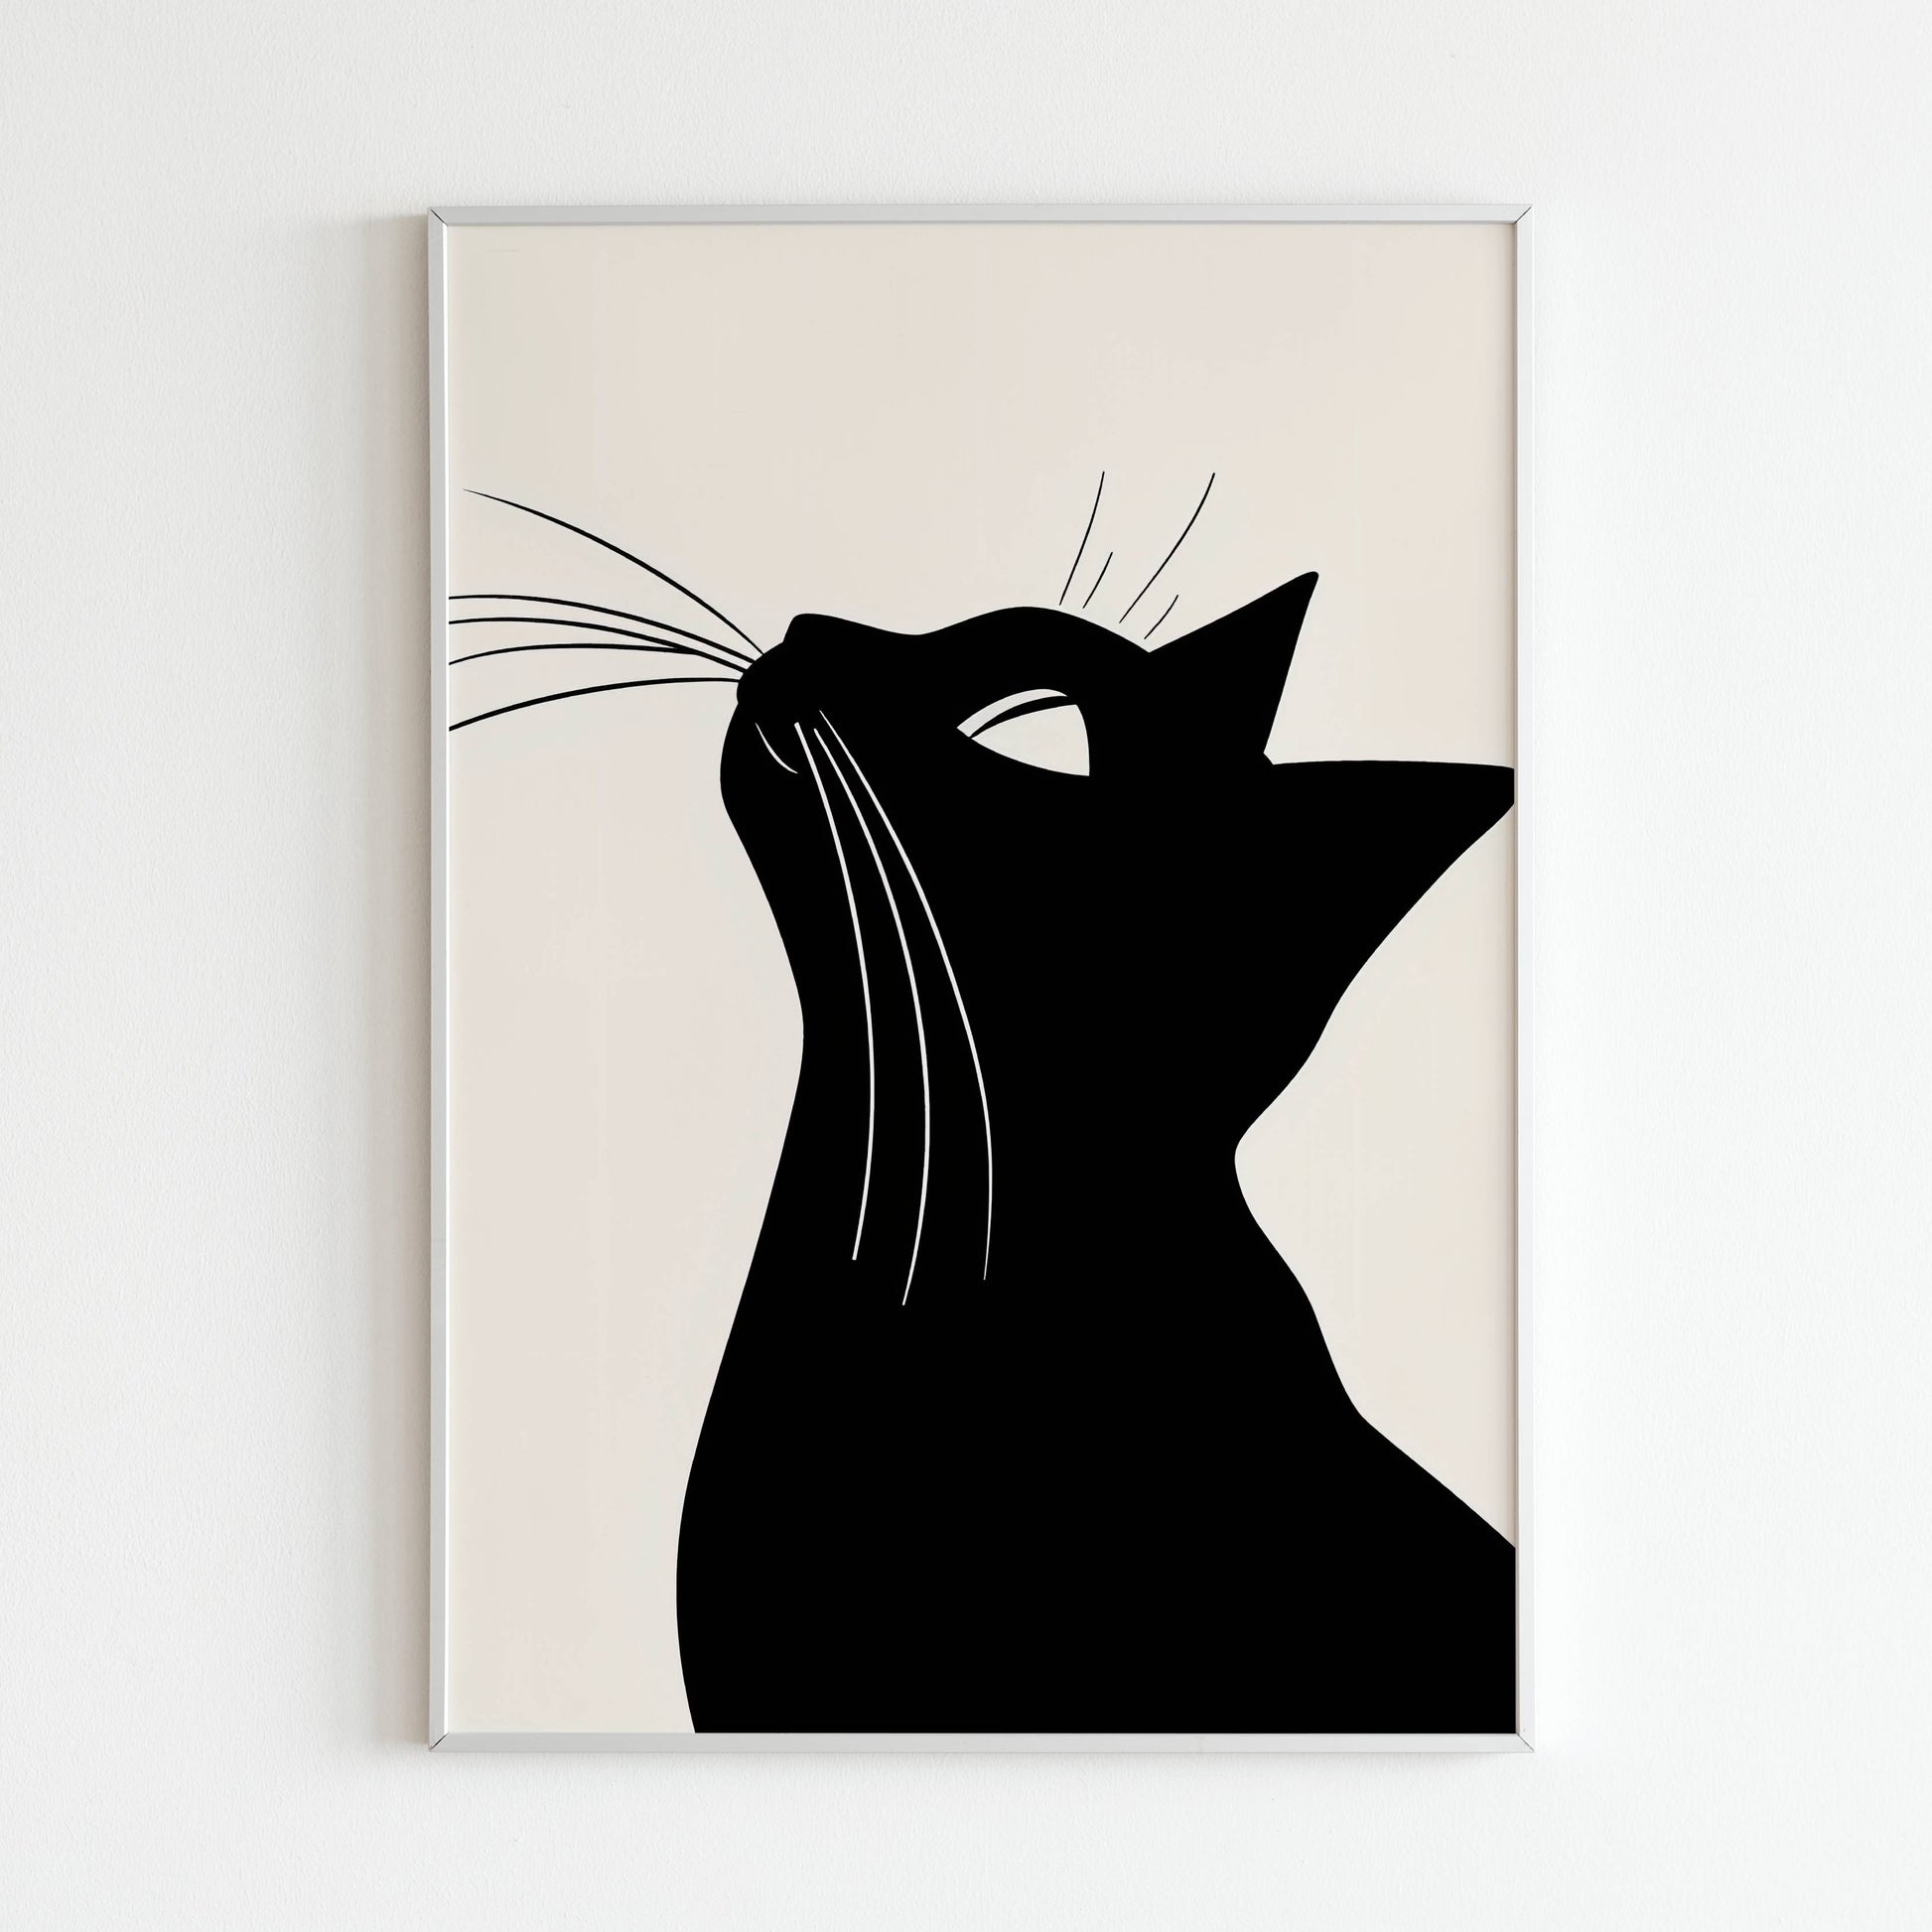 Minimalist Black Cat close-up of printable wall art poster. Focus on the simple lines and form.